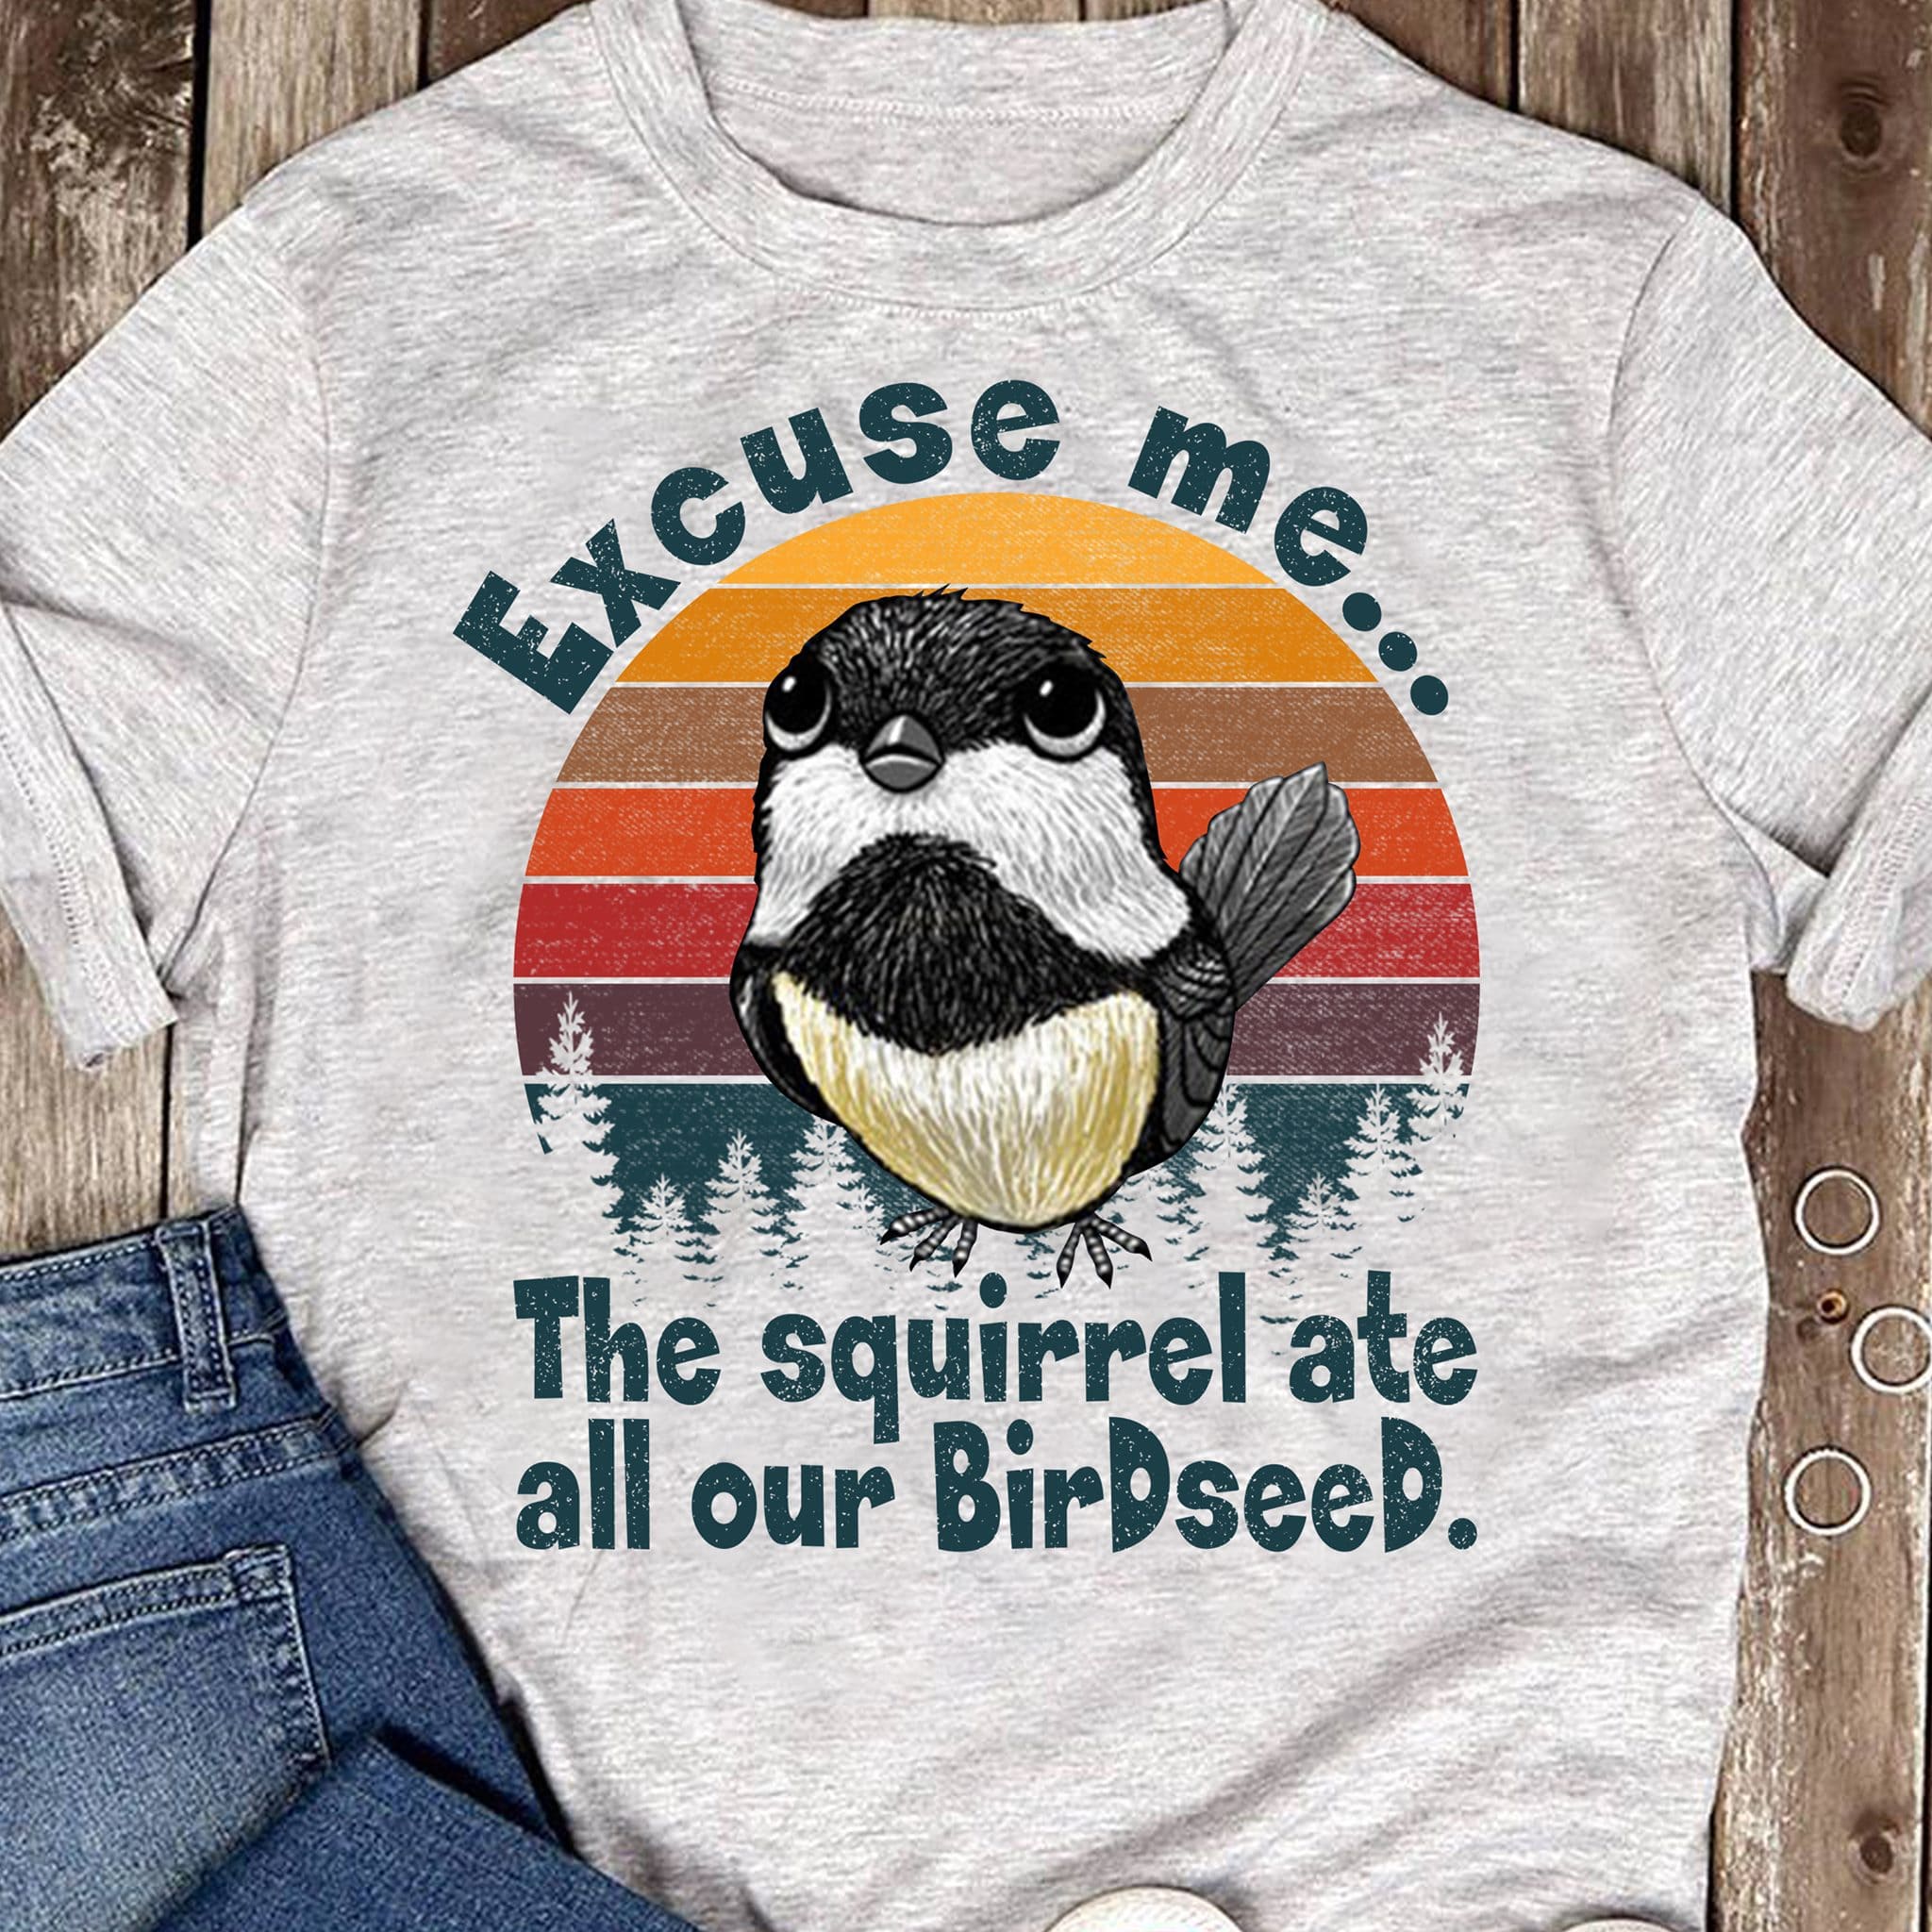 Excuse me, the squirrel ate all our birdseed - Cute sparrow bird T-shirt, squirrel and bird